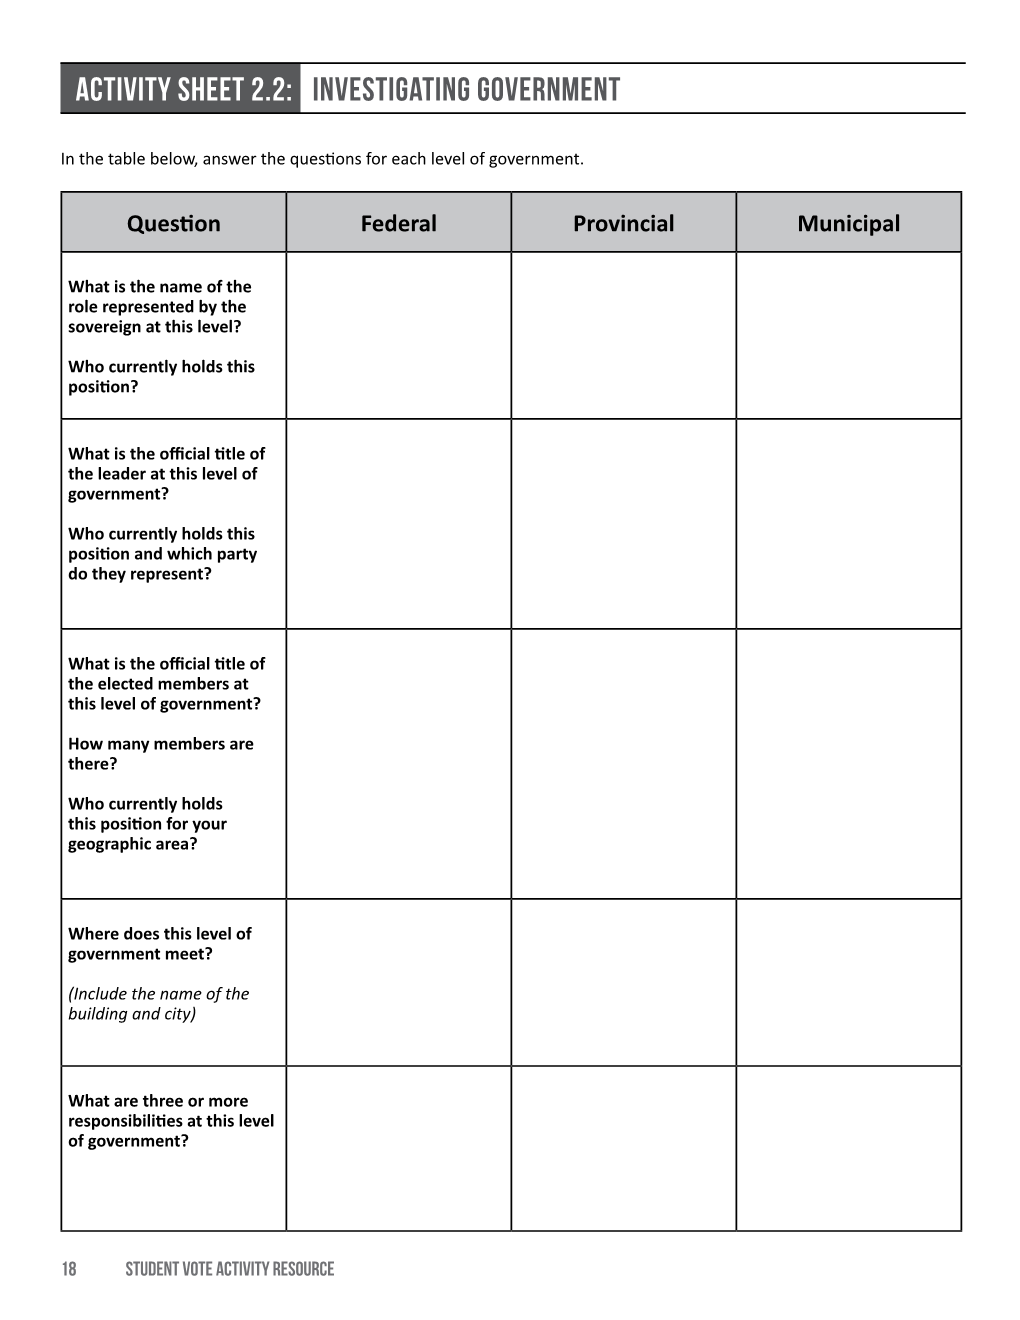 ACTIVITY SHEET 2.2: Investigating Government